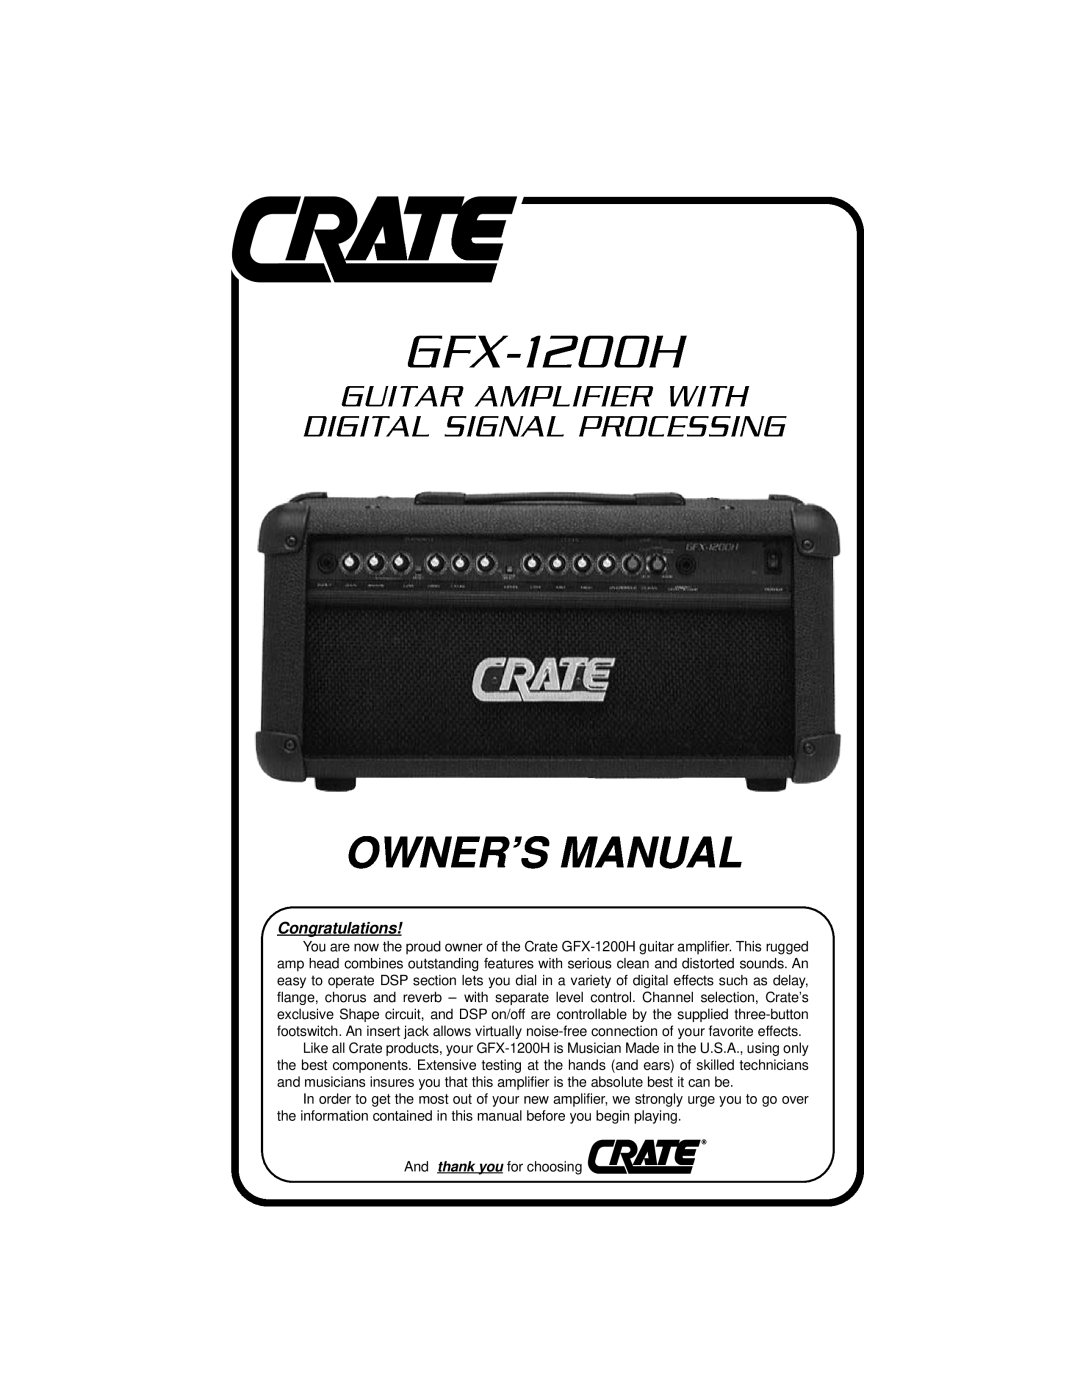 Crate Amplifiers GFX-1200H owner manual Owner’S Manual, Guitar Amplifier With Digital Signal Processing, Congratulations 